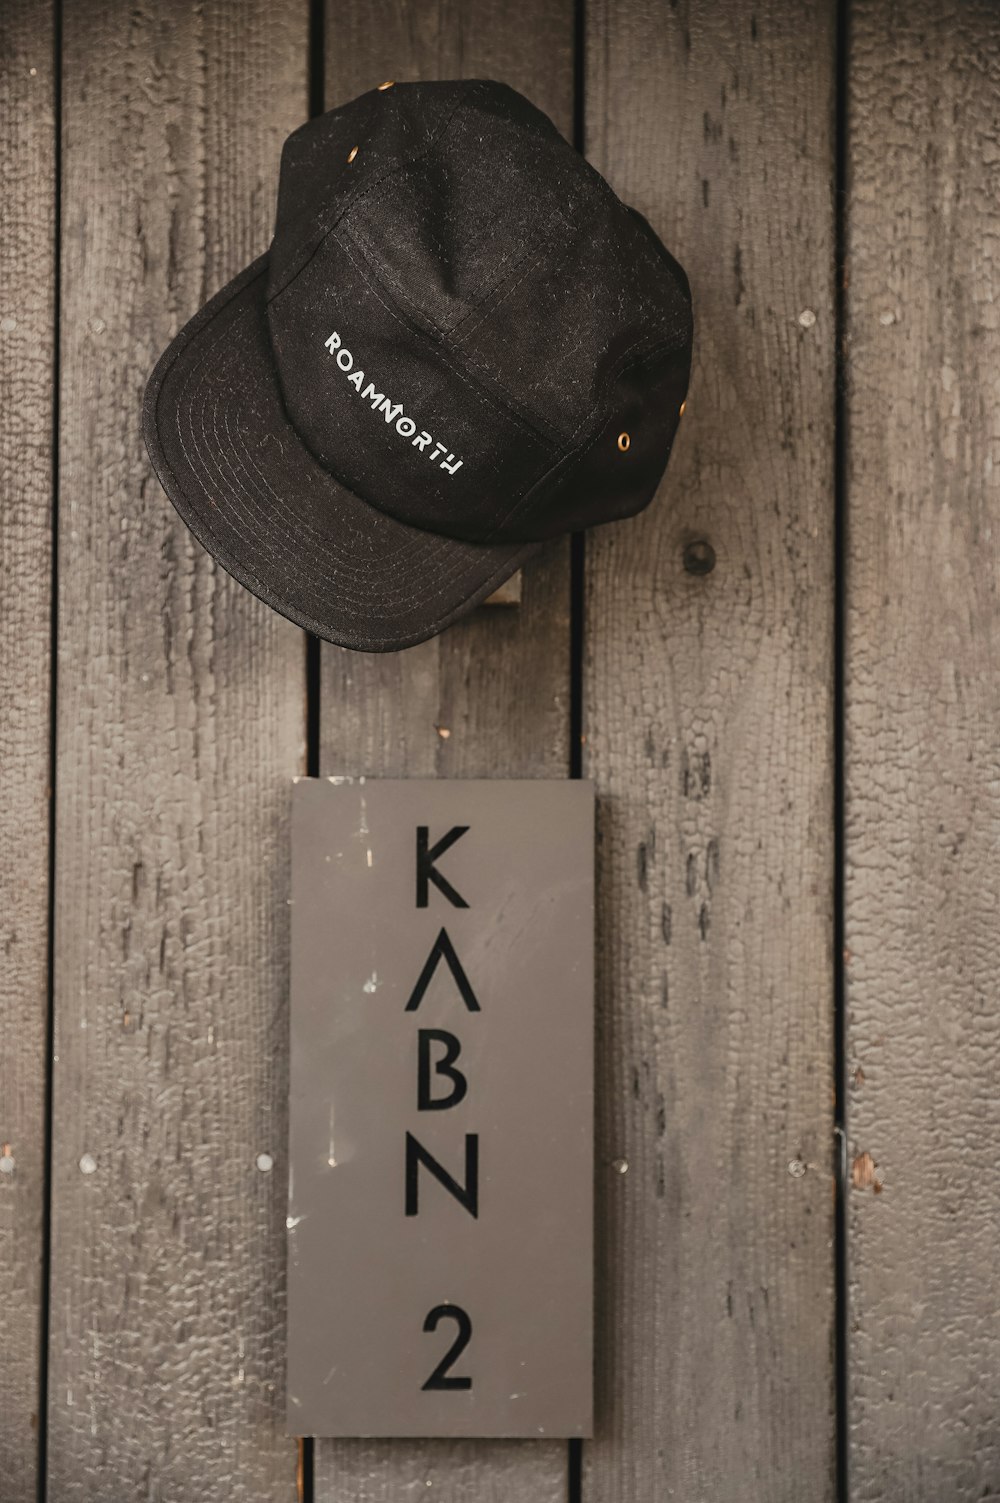 a hat and a sign on a wooden wall